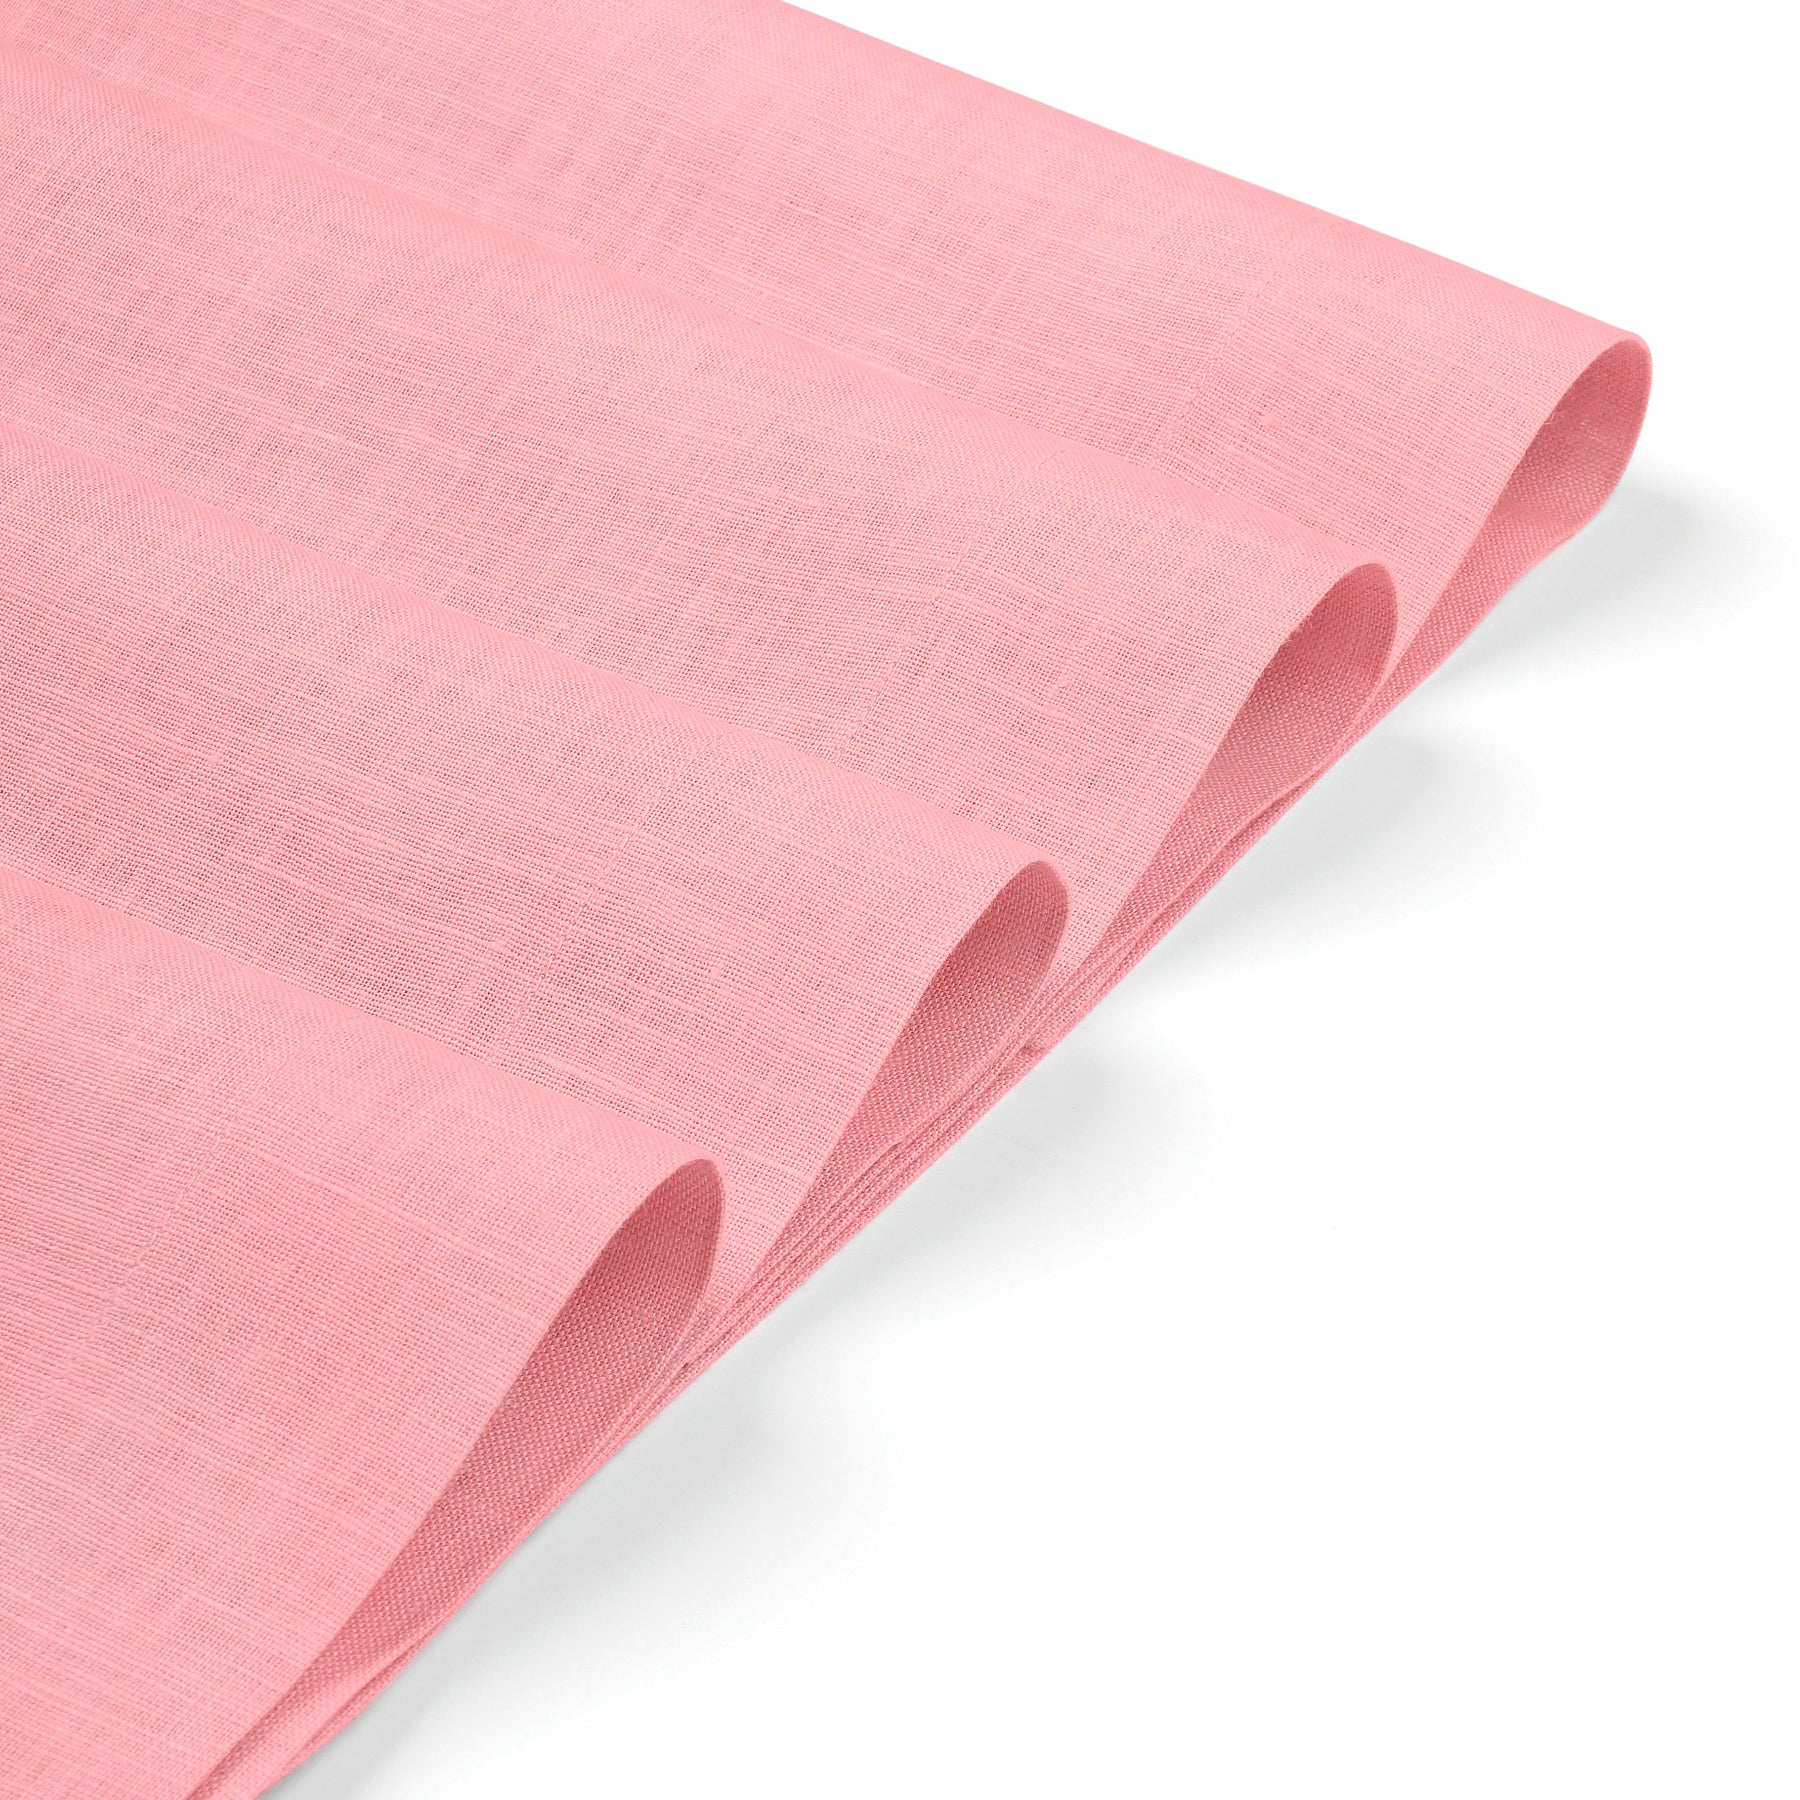 Dusty Pink Linen Placemats 14 x 19 Inch Set of 4 - Hemmed